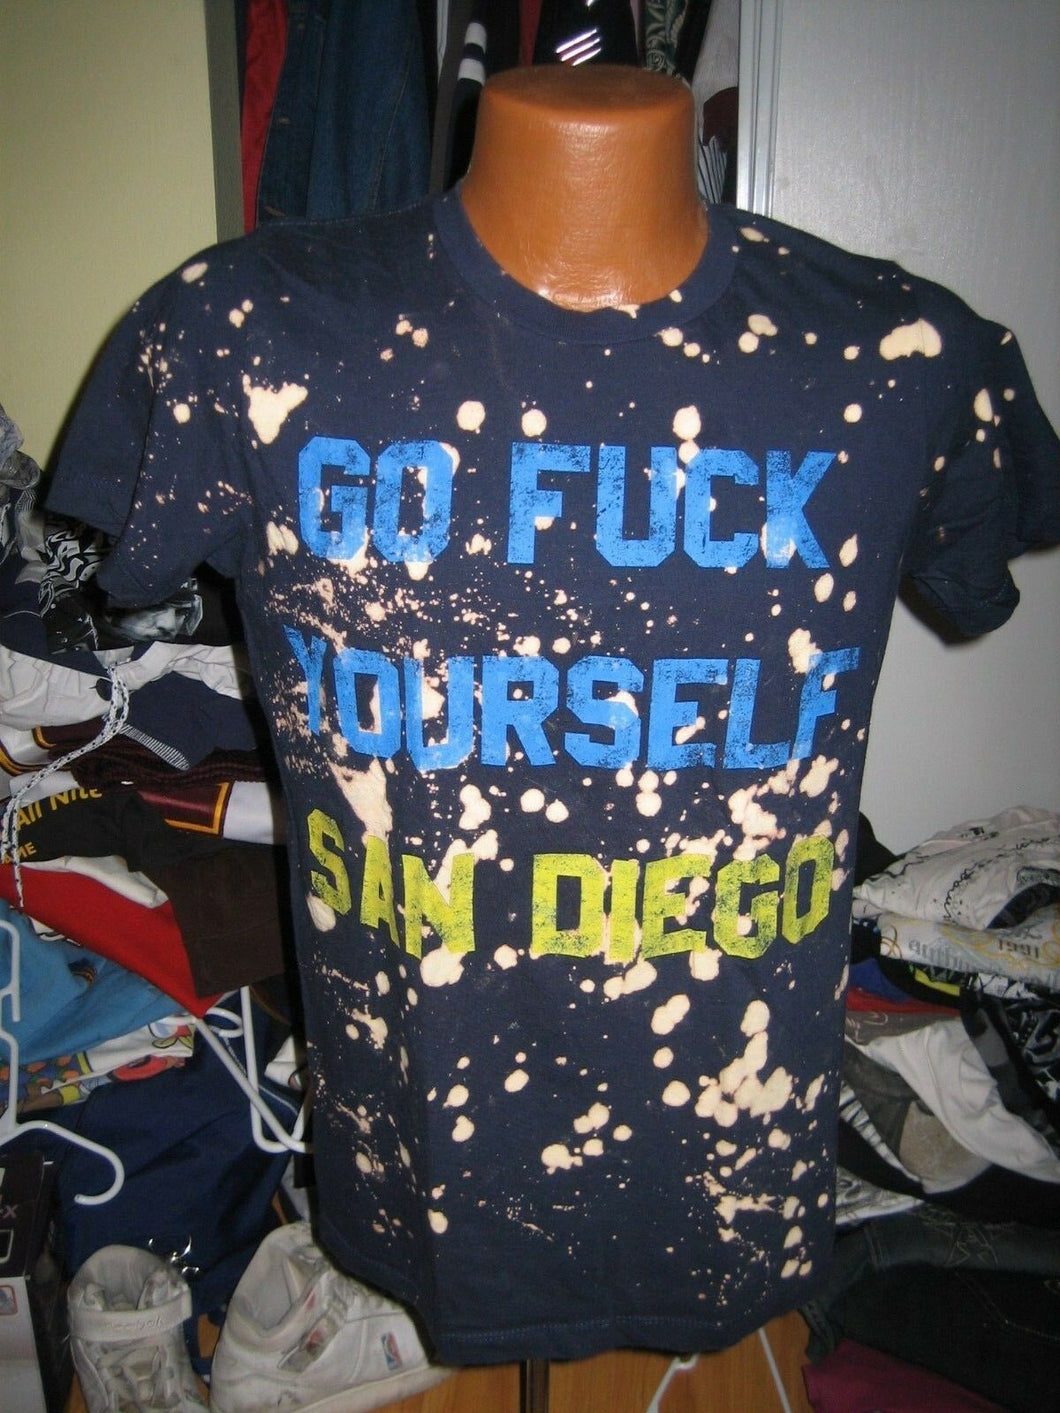 GO F$%K YOURSELF SAN DIEGO SHIRT BY TWO STONED JOKE ANTI CHARGERS FOOTBALL NFL